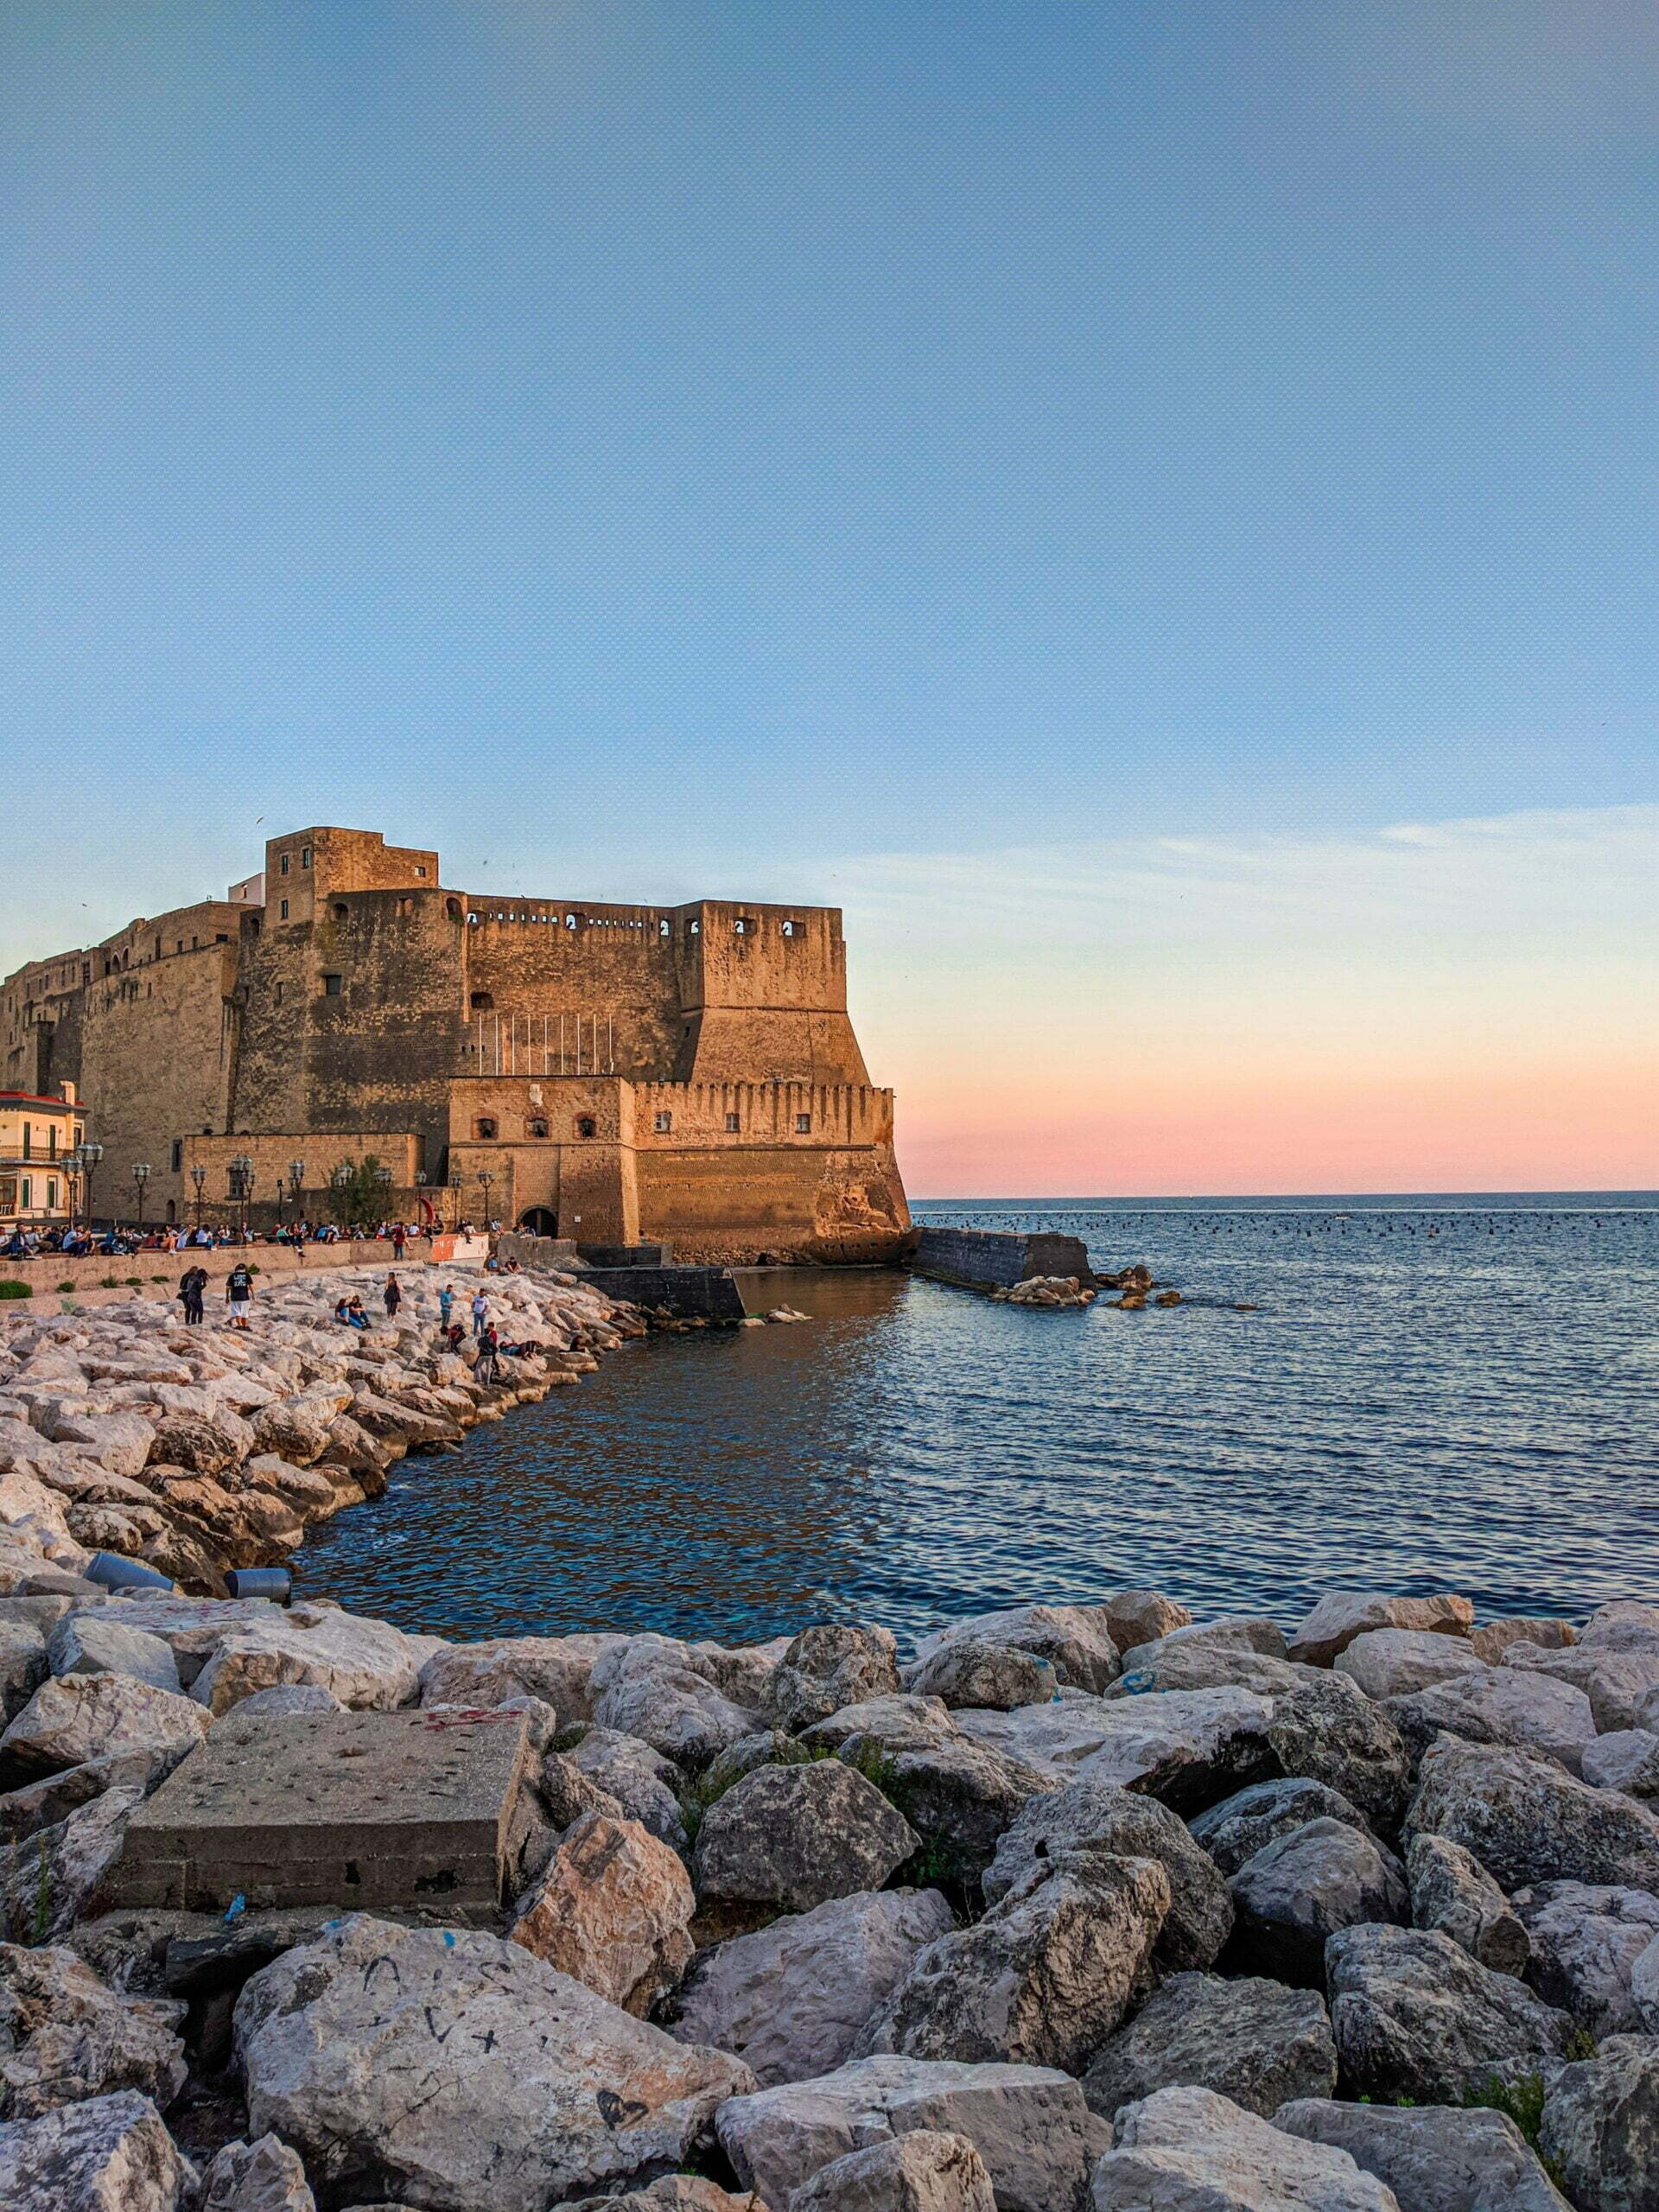 6 Reasons To Visit Naples, Italy